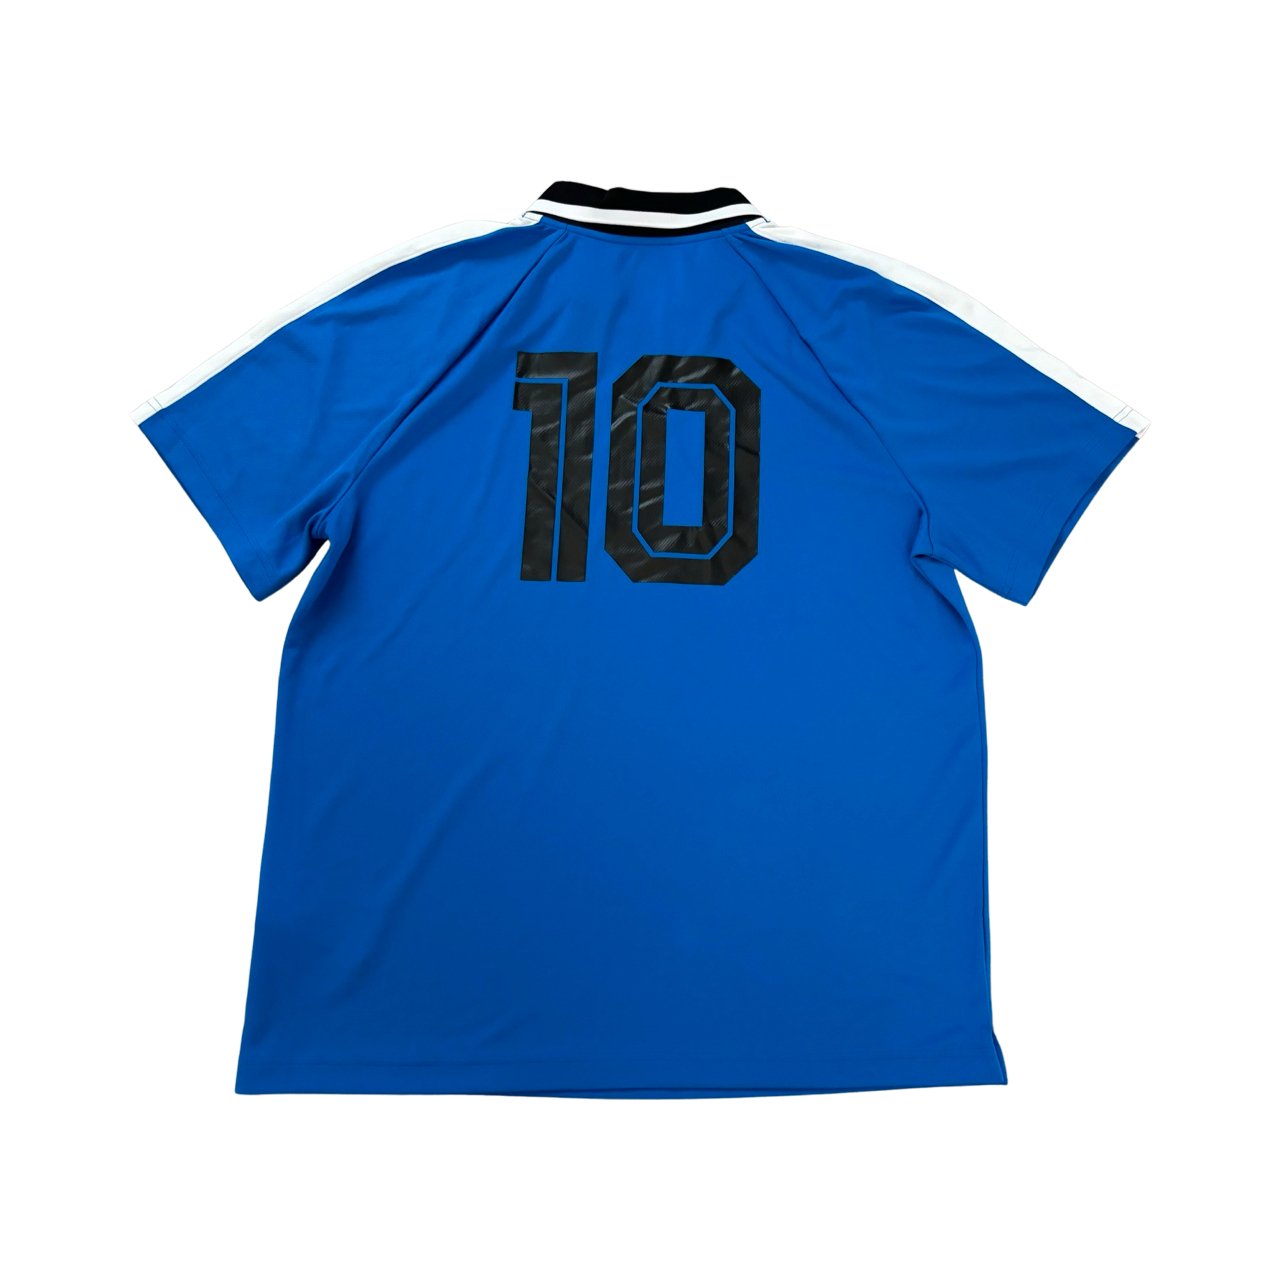 Soccer Jersey Under Armour Sportstyle 96 Men -Exclusive collection - Soul and Sense Streetwear